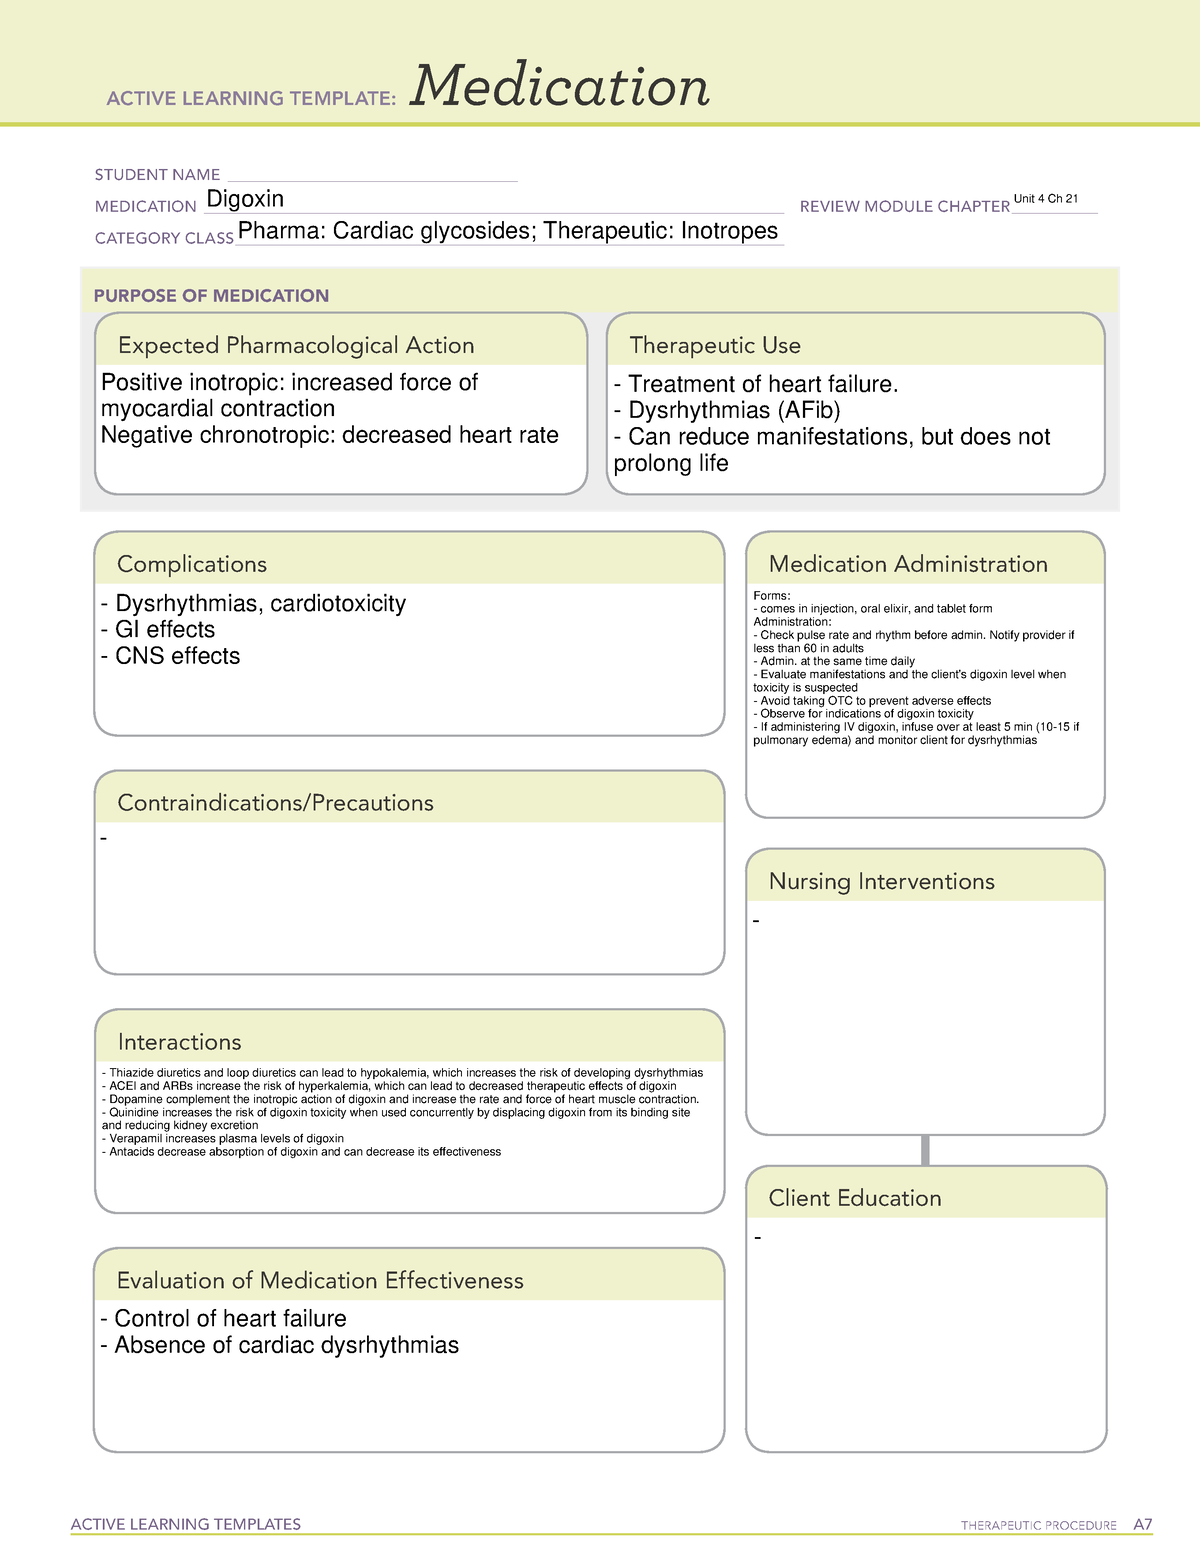 Digoxin (Medication ALT) ACTIVE LEARNING TEMPLATES THERAPEUTIC